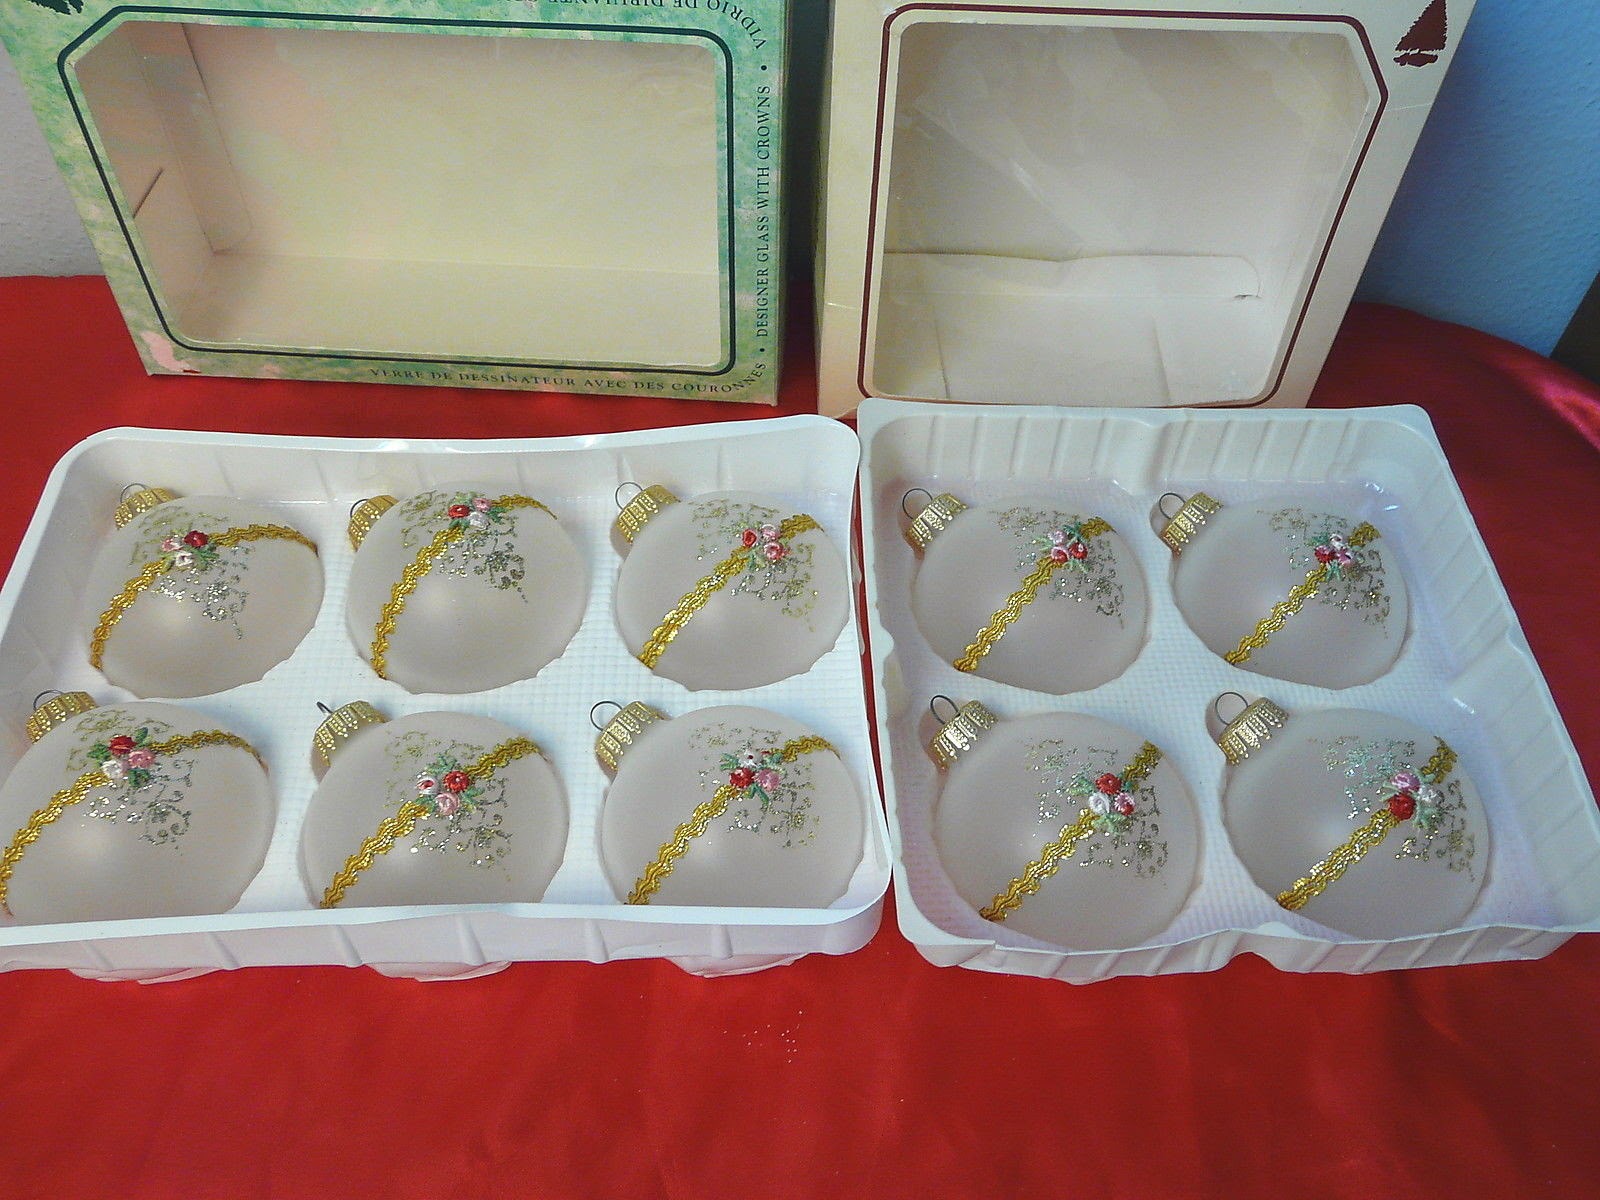 Vintage 1980's Glittered Ribbon Frosted Glass Ornaments Christmas by Krebs